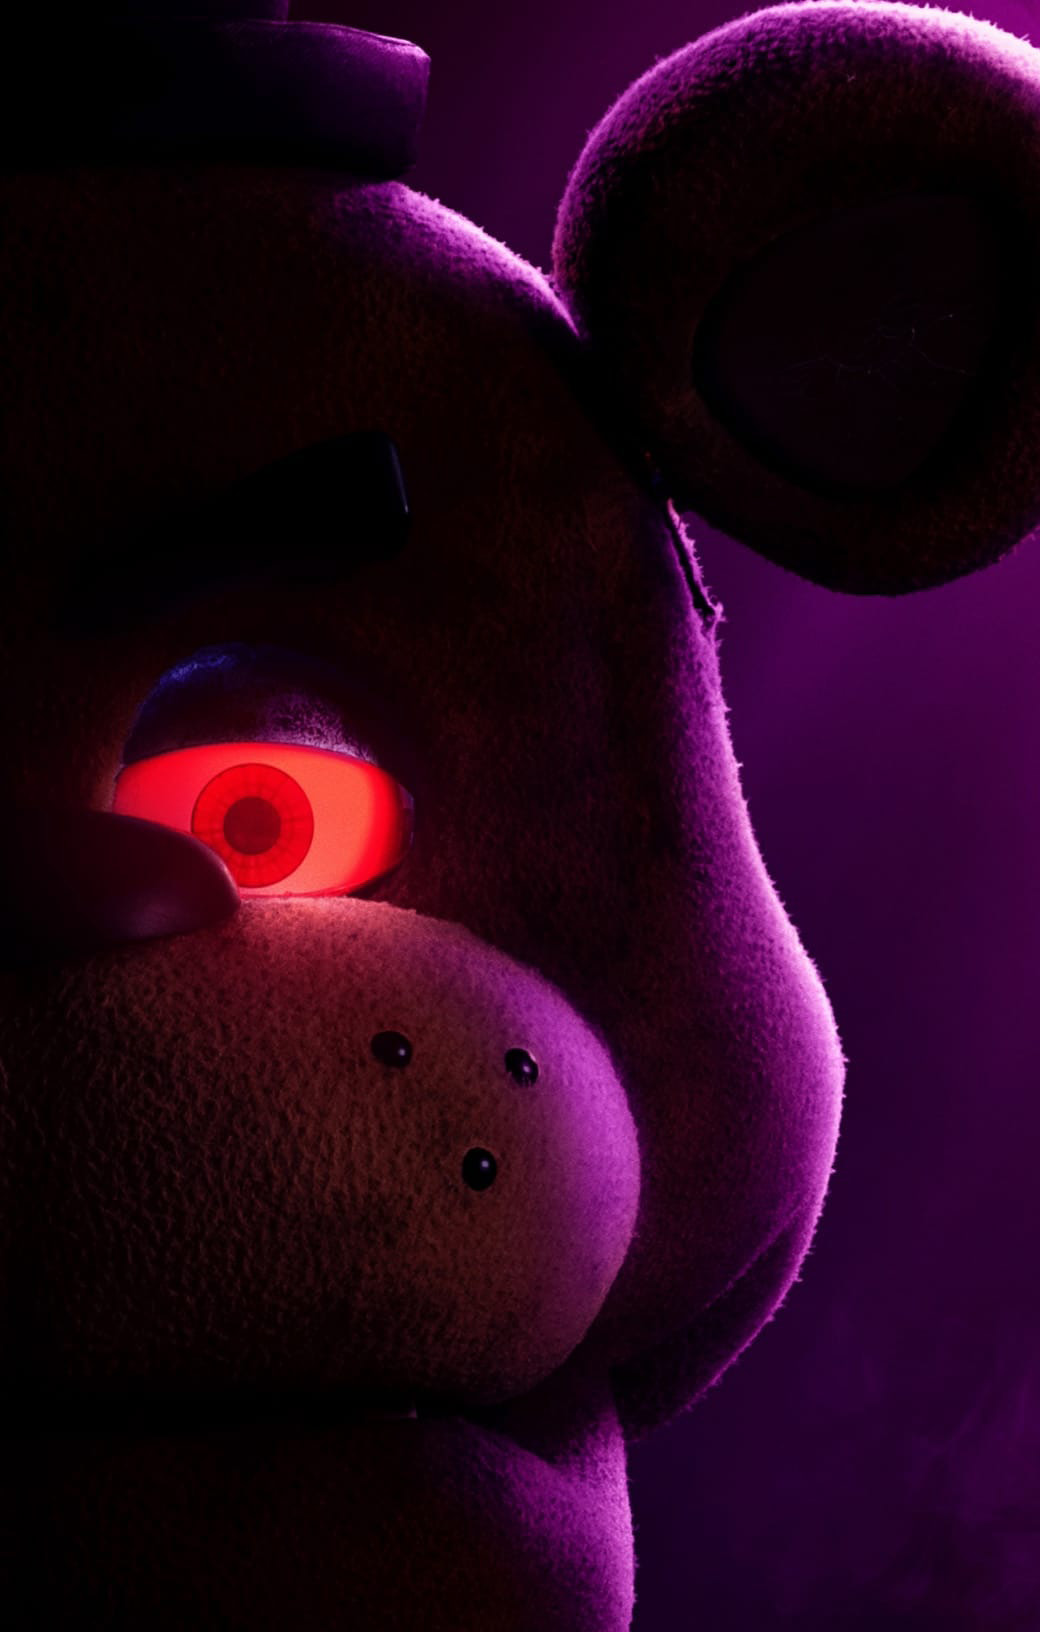 Photo courtesy of Universal Studios Based on a series of video games, the first of which came out in 2014, FNAF has upwards of five different horror games including “Sister Location” among others.